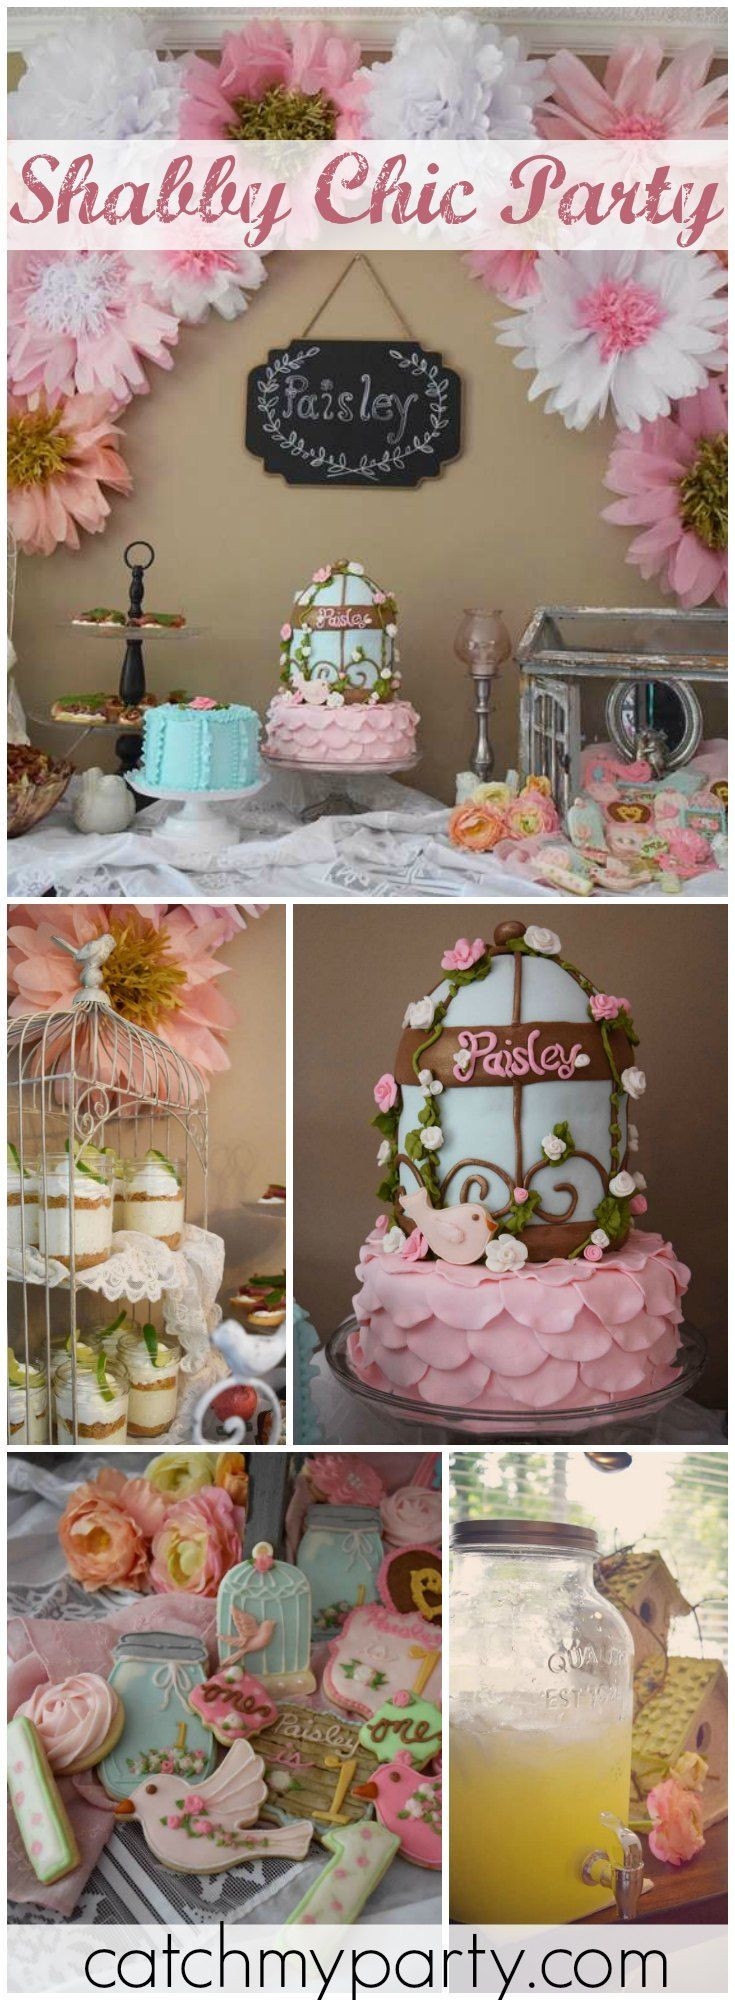 Shabby Chic Birthday Party Ideas
 512 best Shabby Chic Party Ideas images on Pinterest